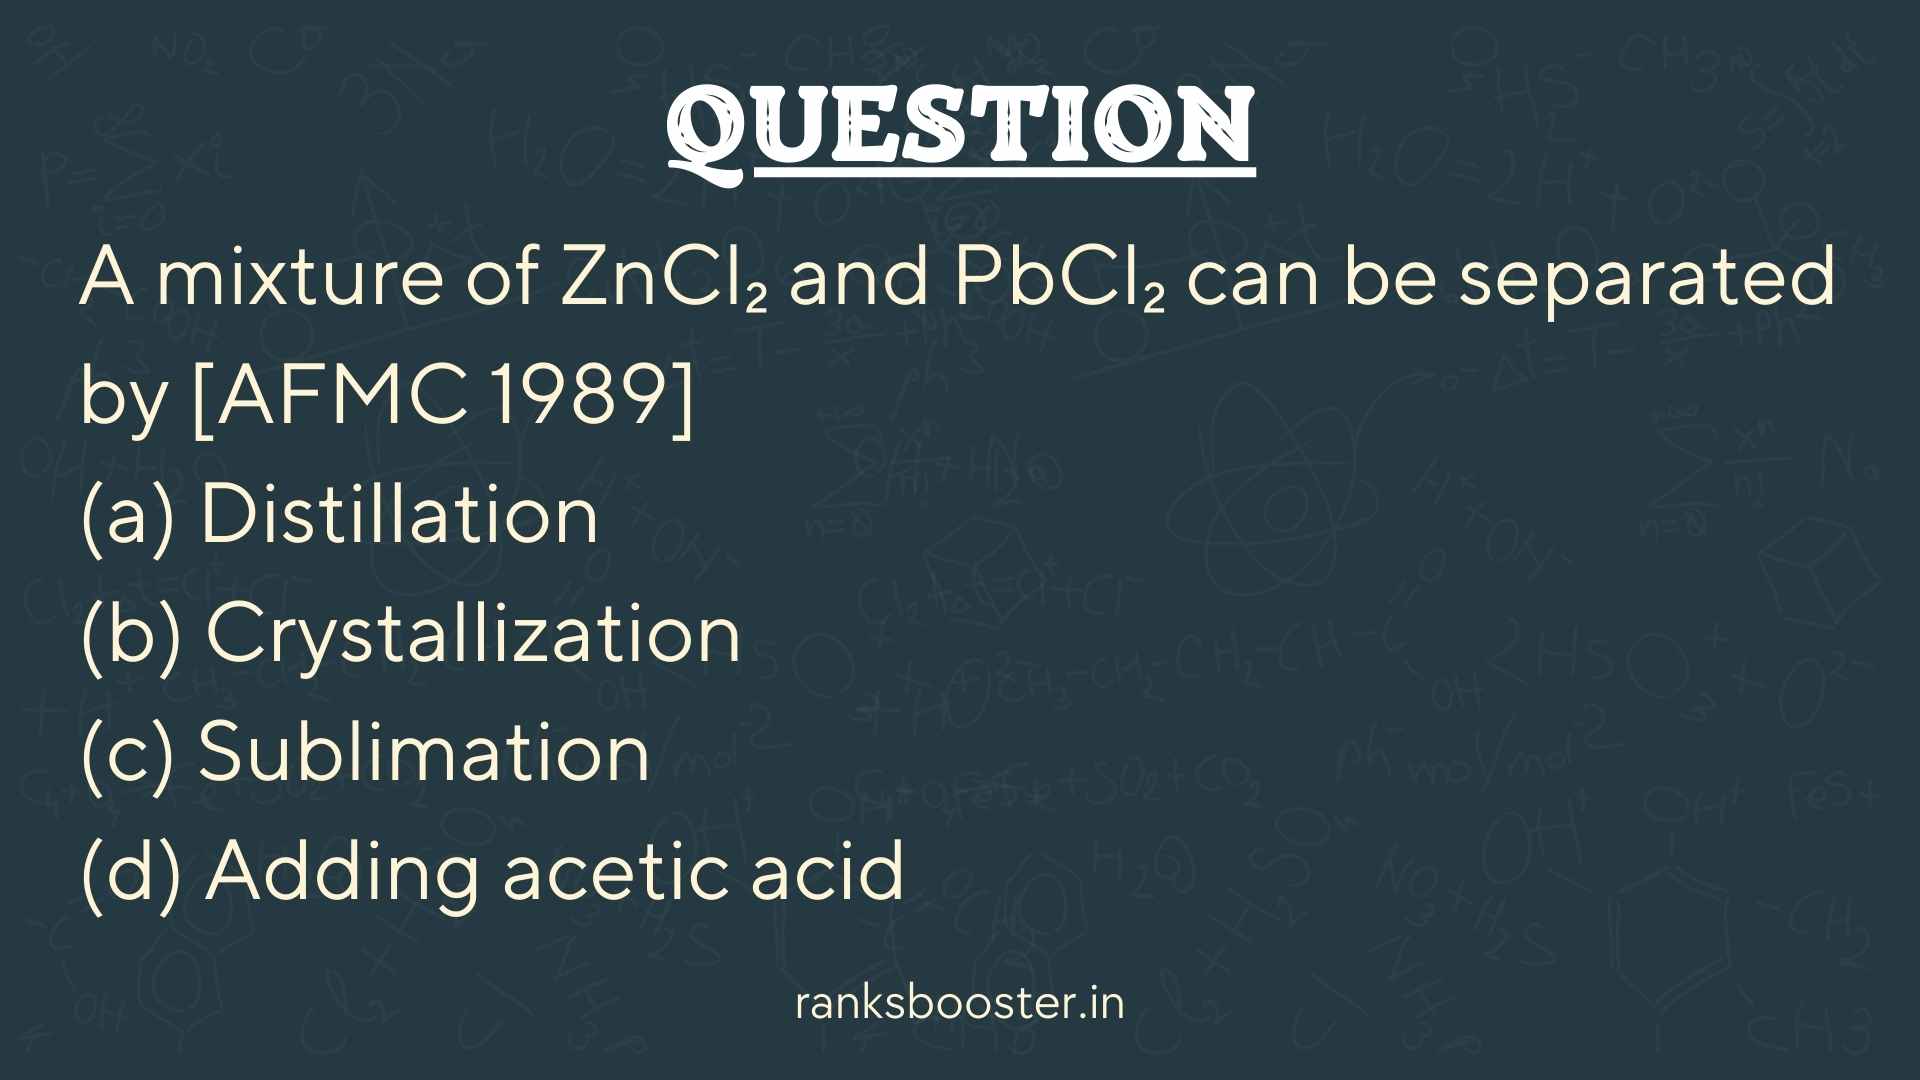 Question: A mixture of ZnCl₂ and PbCl₂ can be separated by [AFMC 1989] (a) Distillation (b) Crystallization (c) Sublimation (d) Adding acetic acid